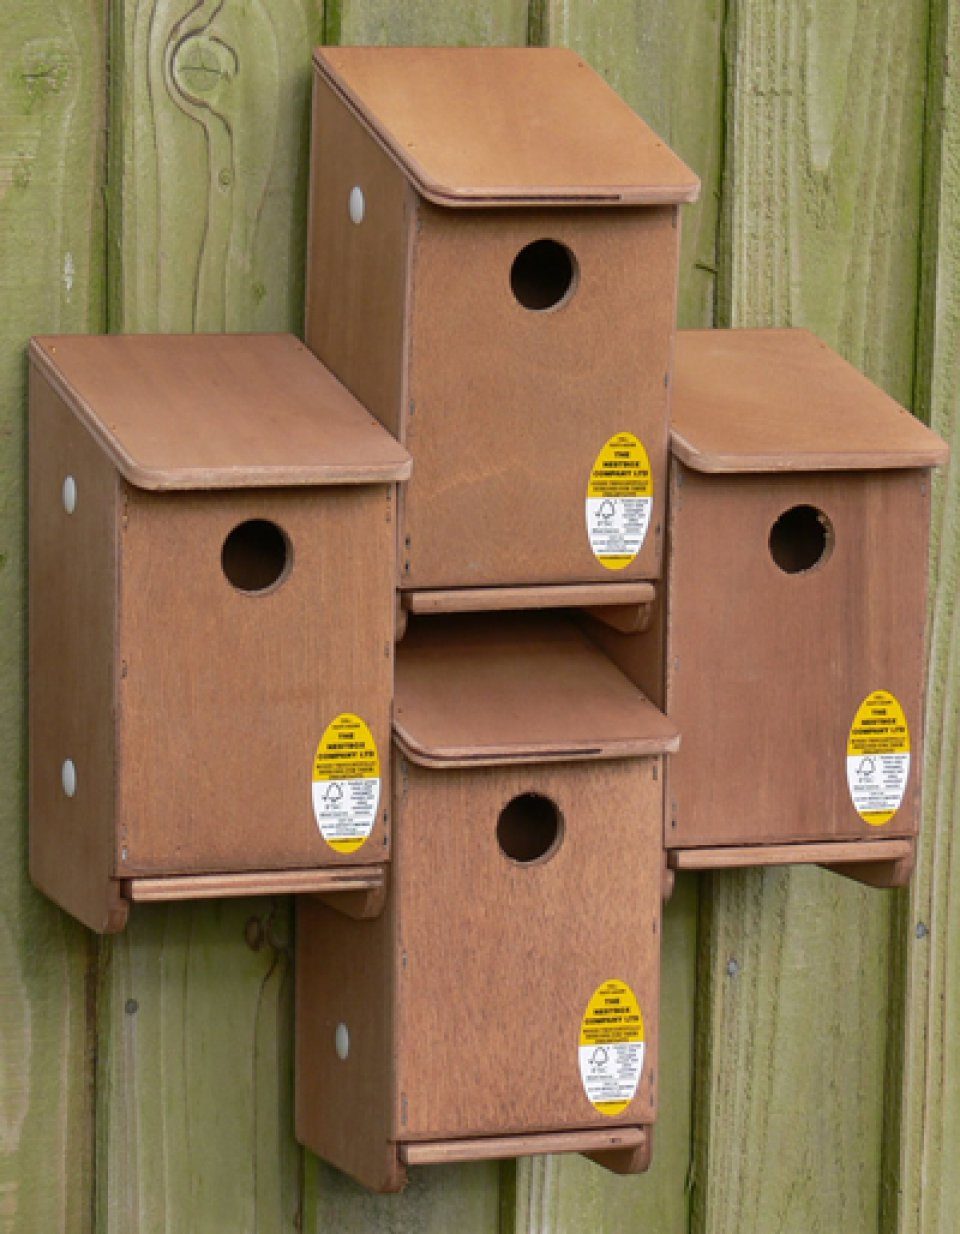 Sparrow Nest Box System NHBS Practical Conservation 